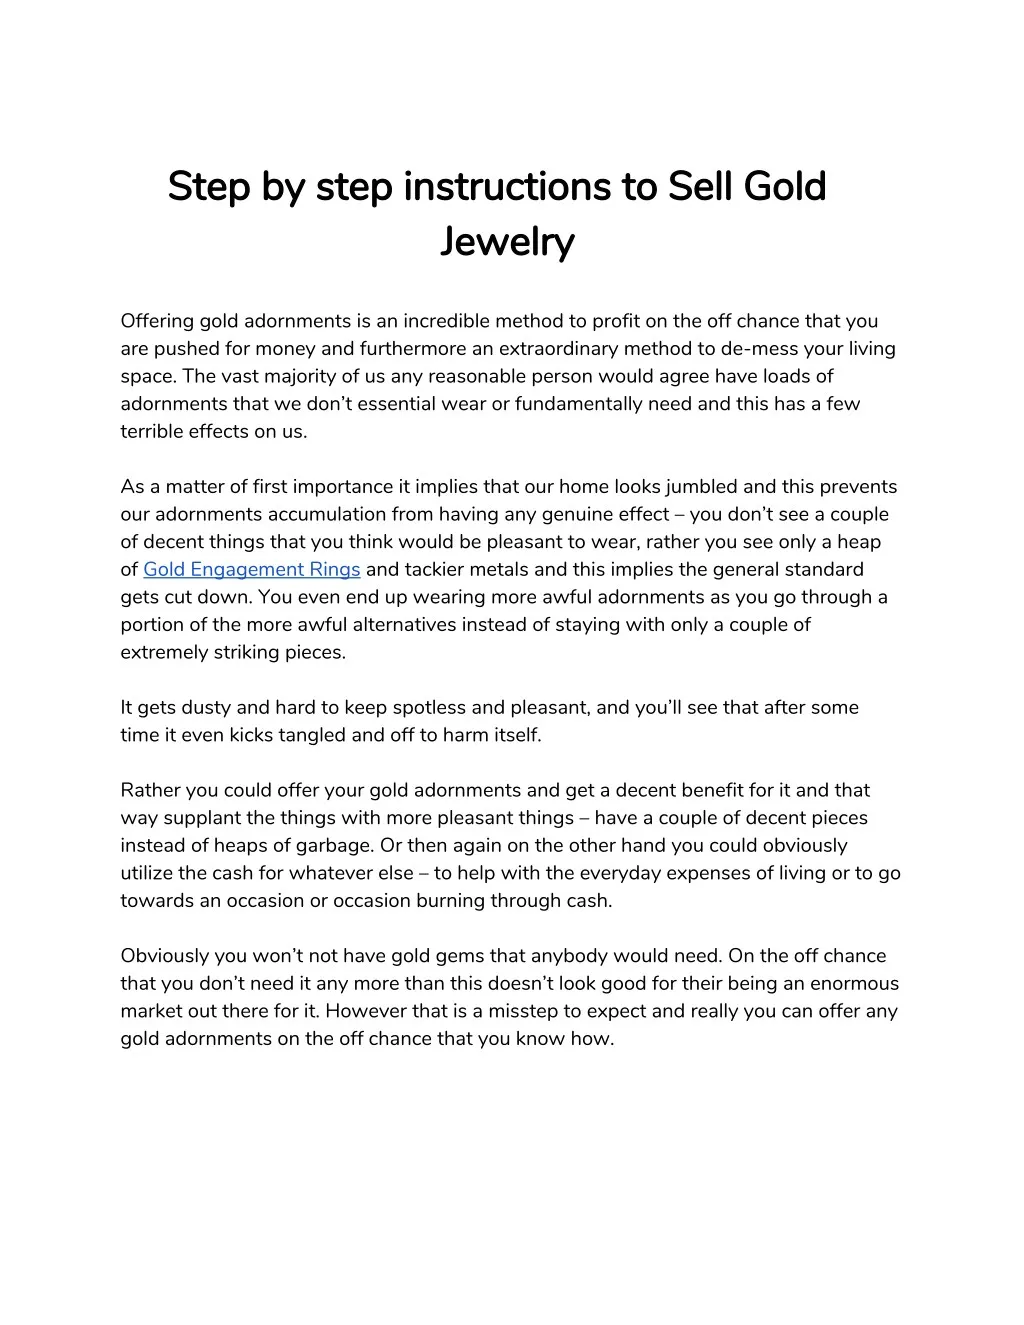 step by step instructions to sell gold step